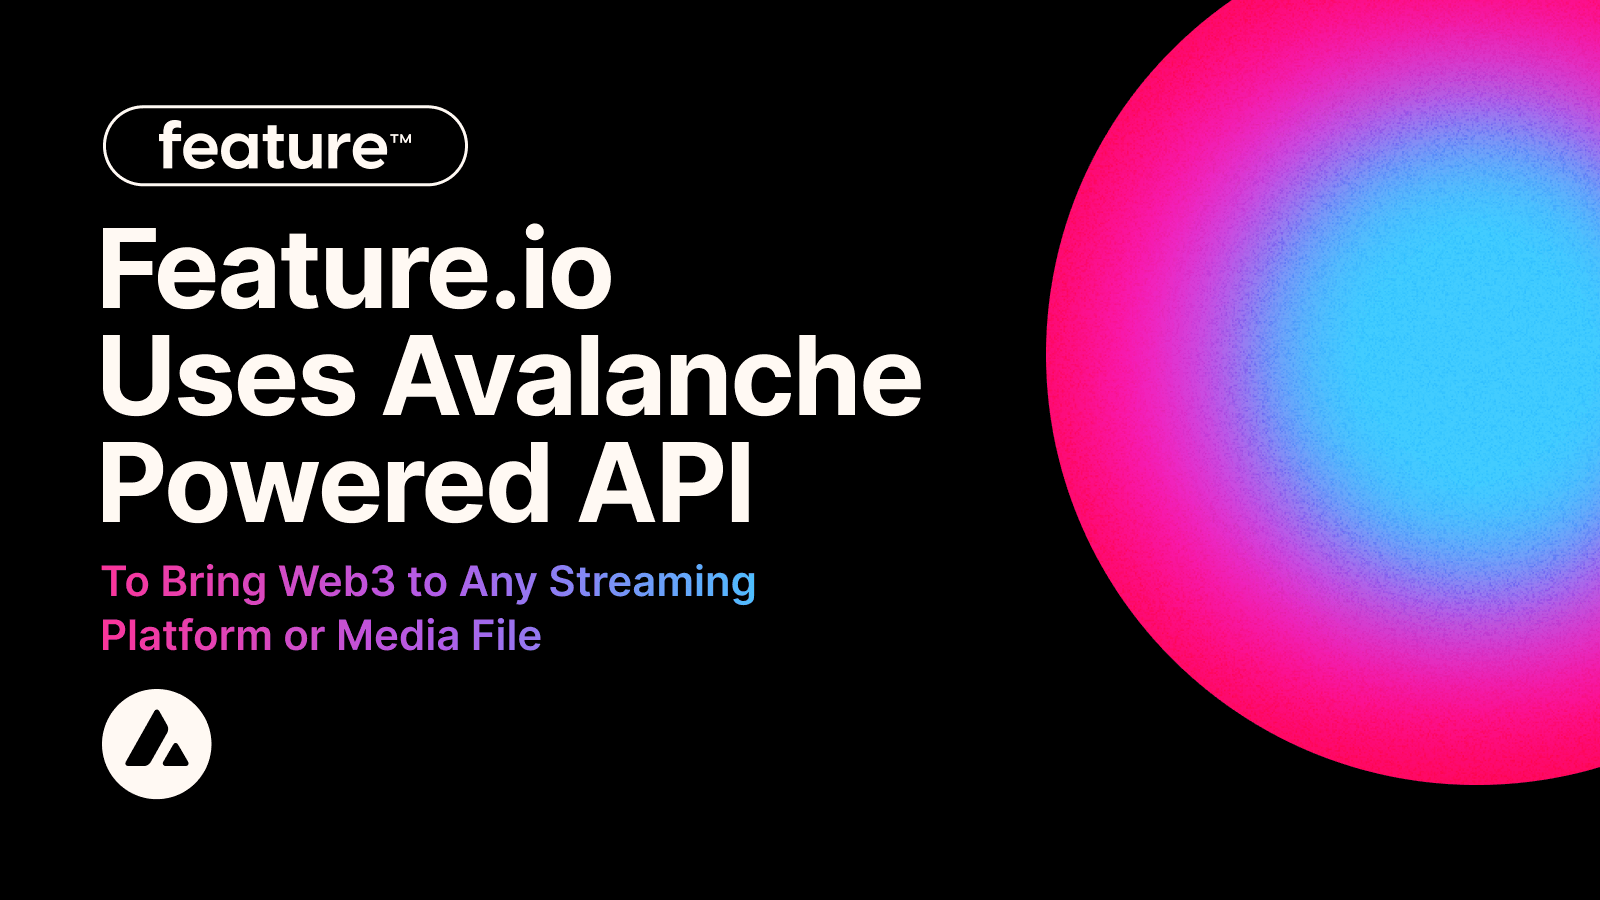 Feature.io uses Avalanche-powered API to bring Web3 to streaming and media